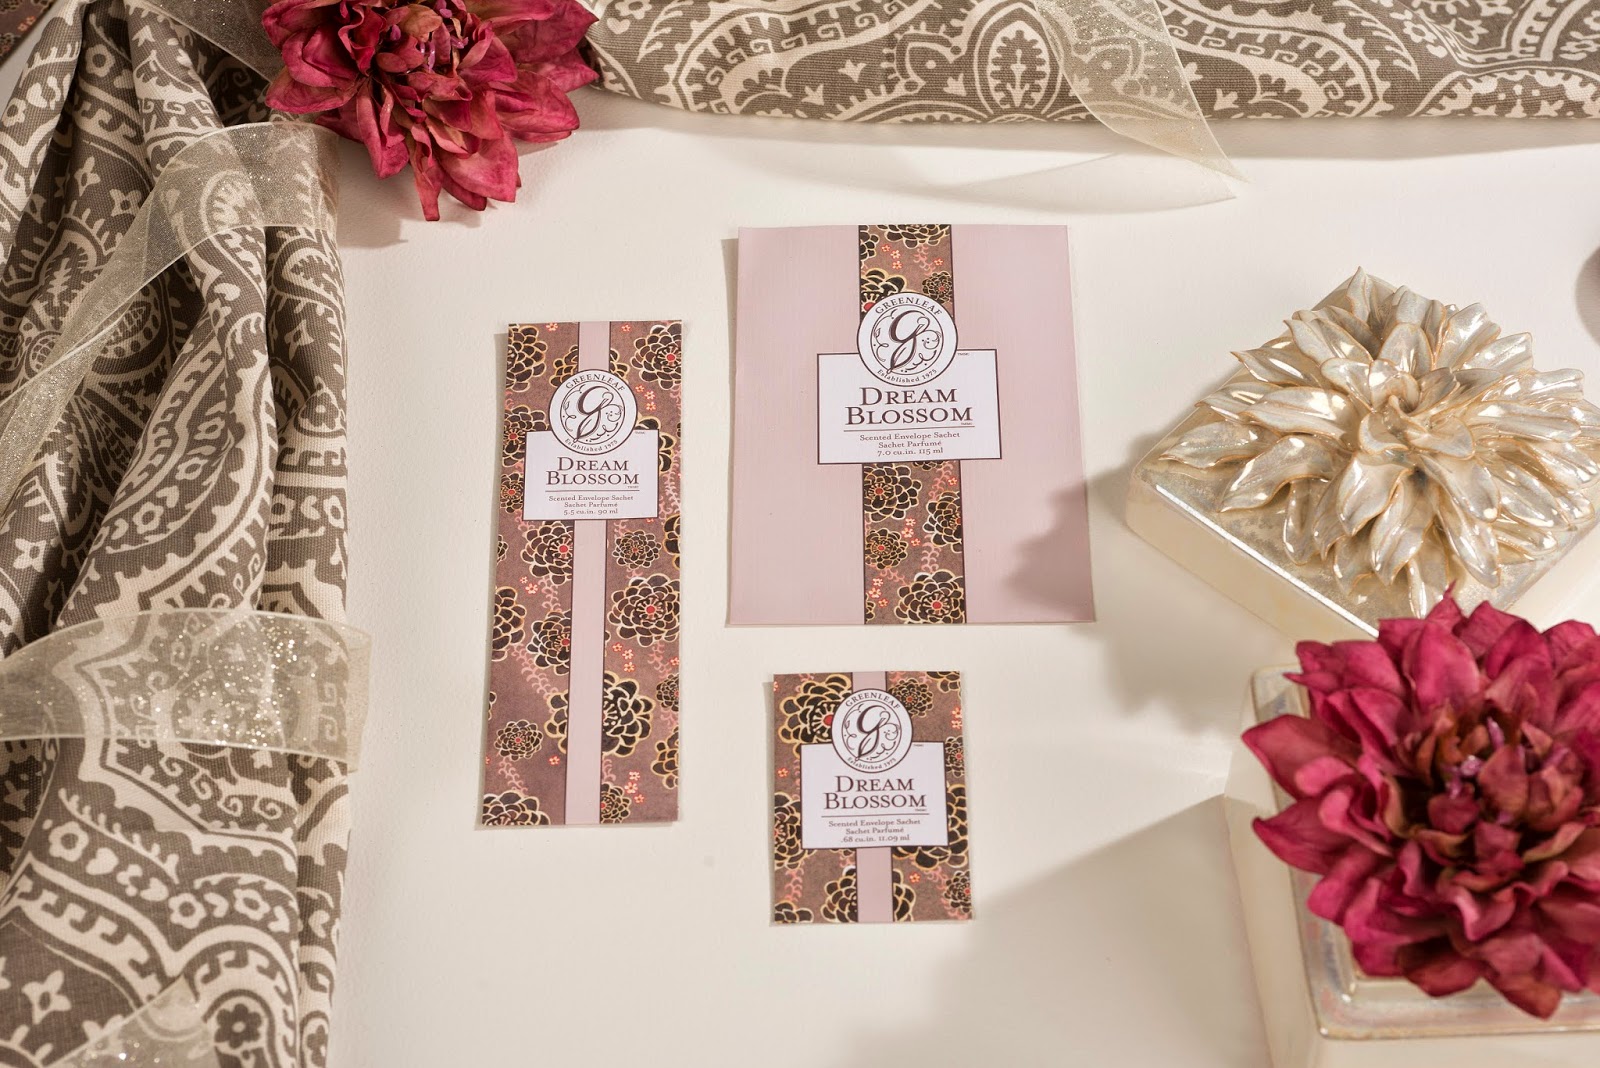 Both Greenleaf Fragrances Have Their Own Signature Hand Painted Pattern Throughout Packaging And Are Available In Sprays Sachets Candles